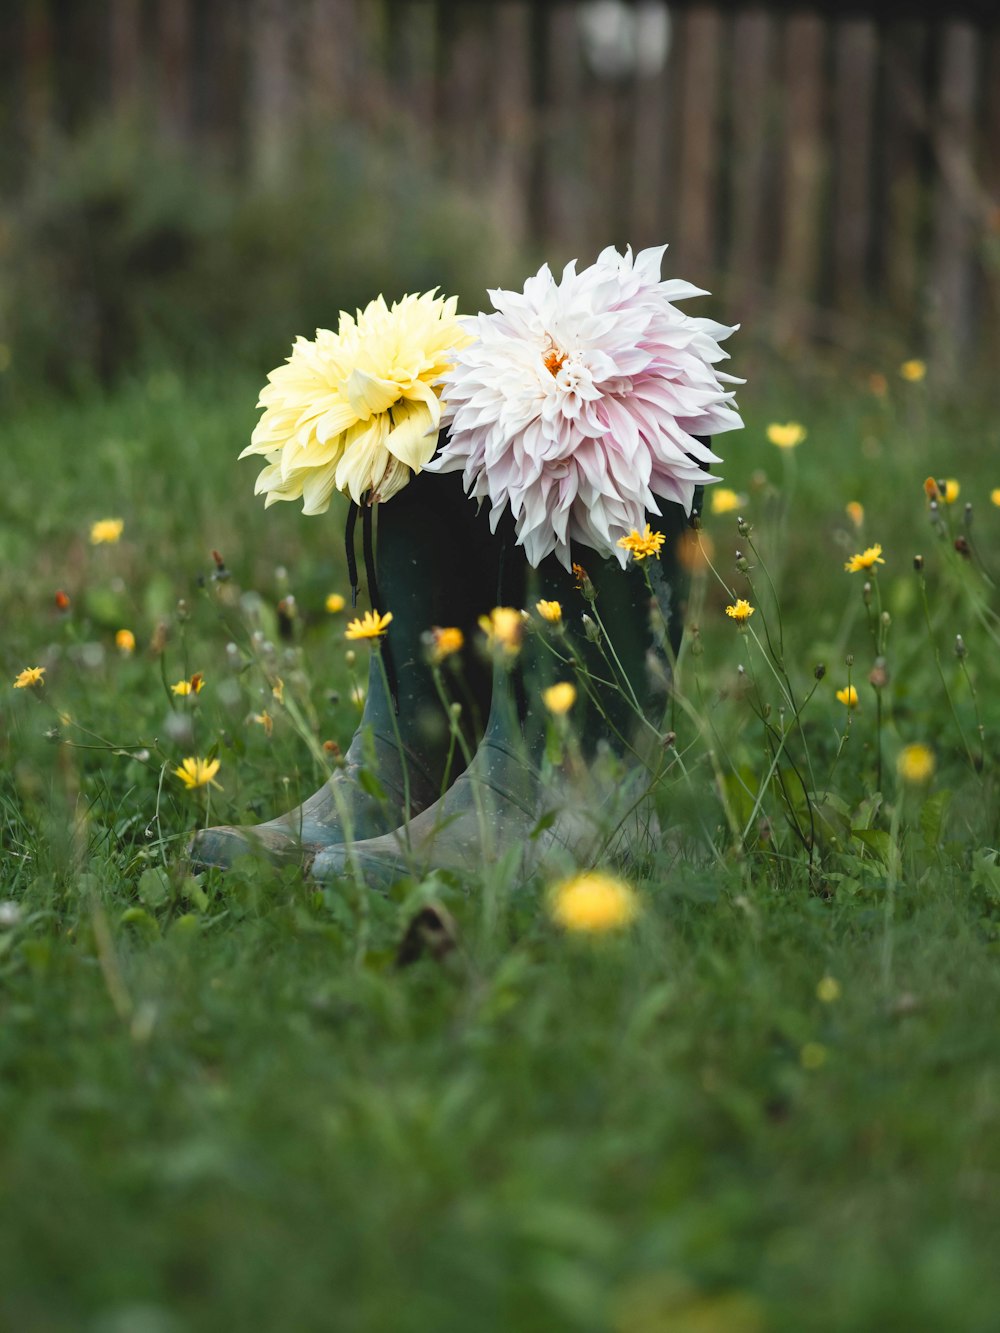 a pair of boots with flowers in them sitting in the grass